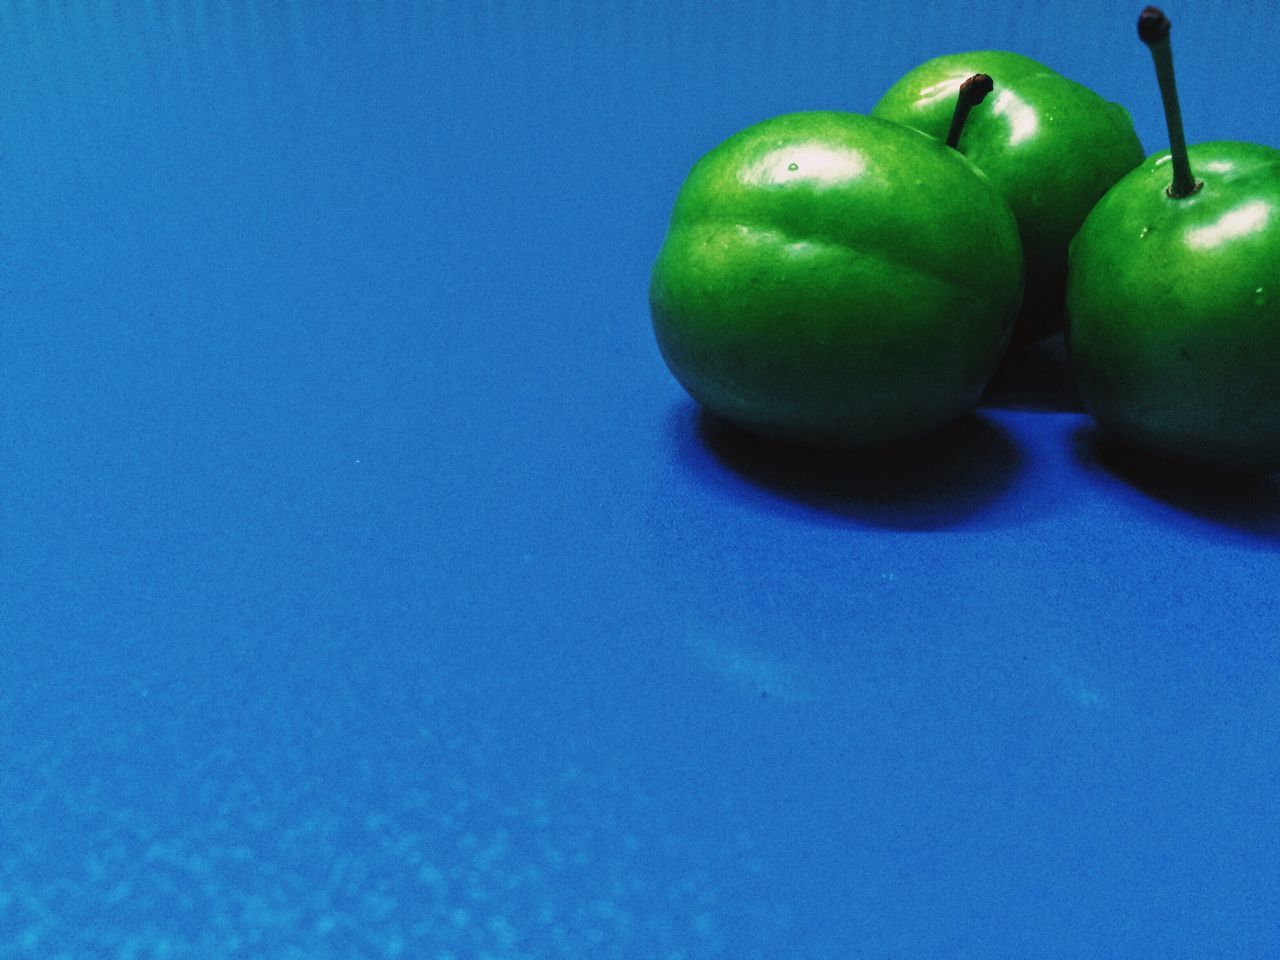 fruit, food and drink, healthy eating, green color, freshness, food, still life, close-up, blue, indoors, copy space, studio shot, no people, table, green, organic, apple, ripe, grape, ball